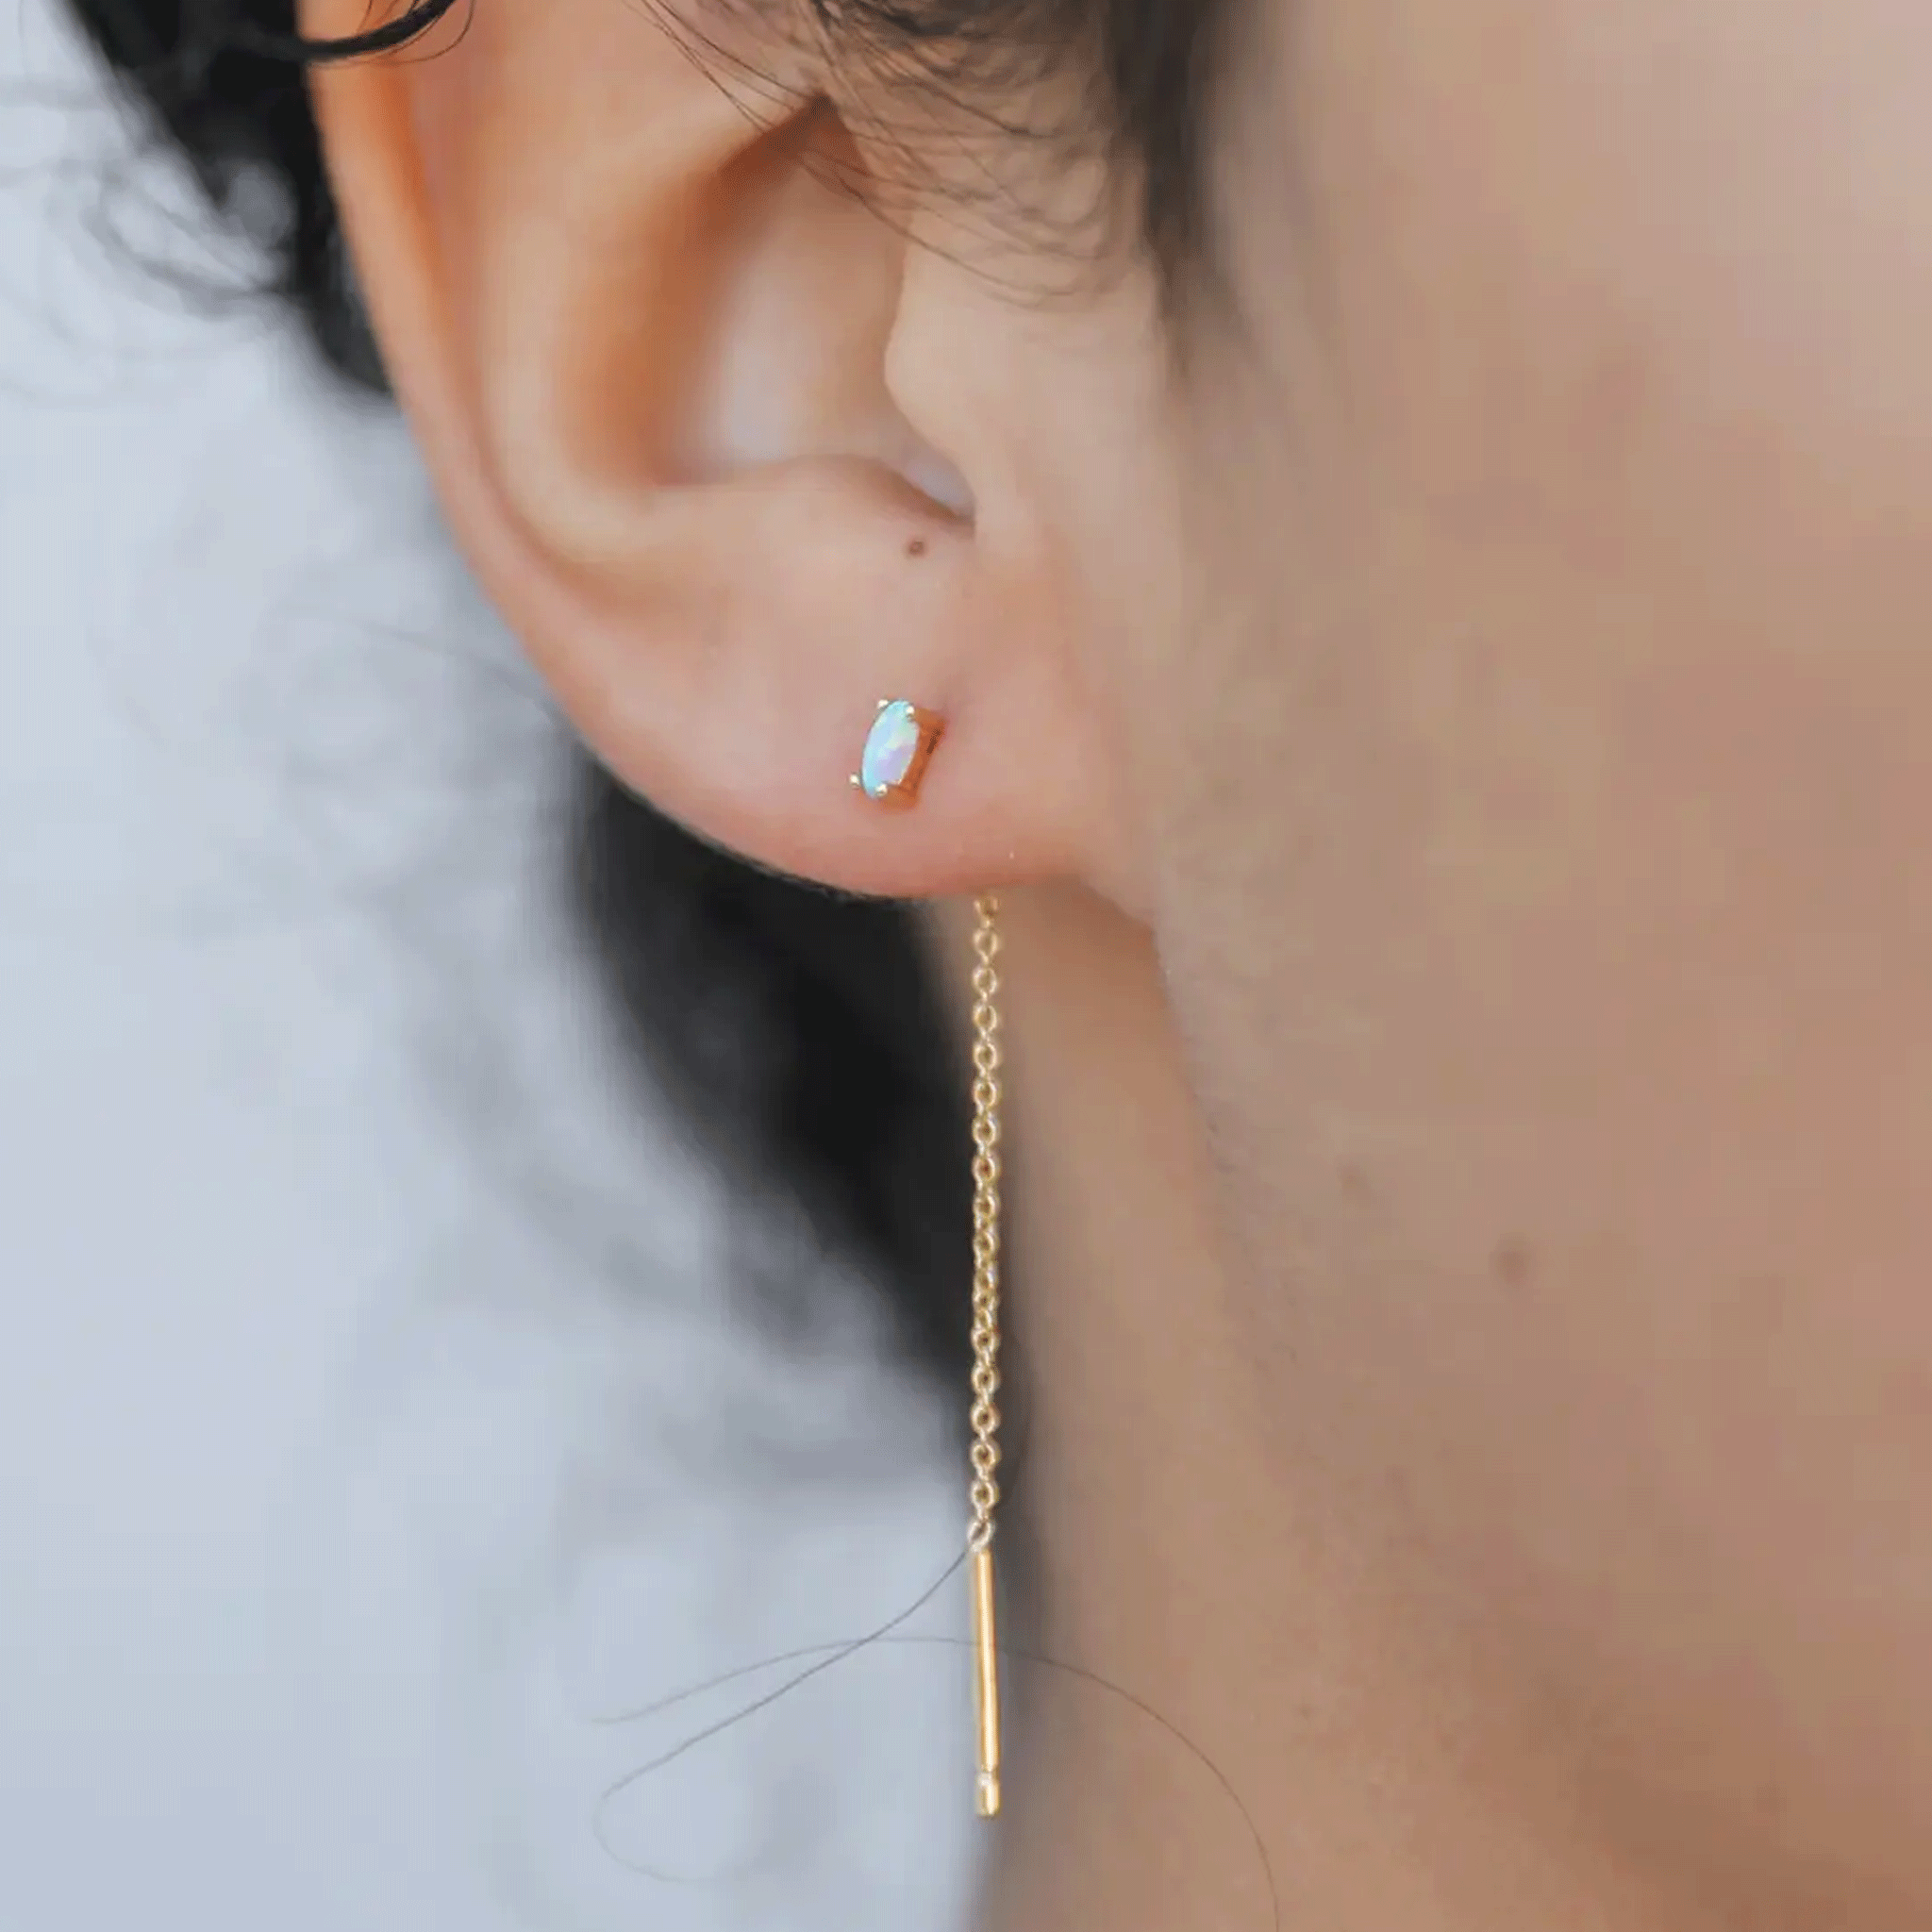 A model wearing a white opal stud with a gold chain thread in the back dangling down.